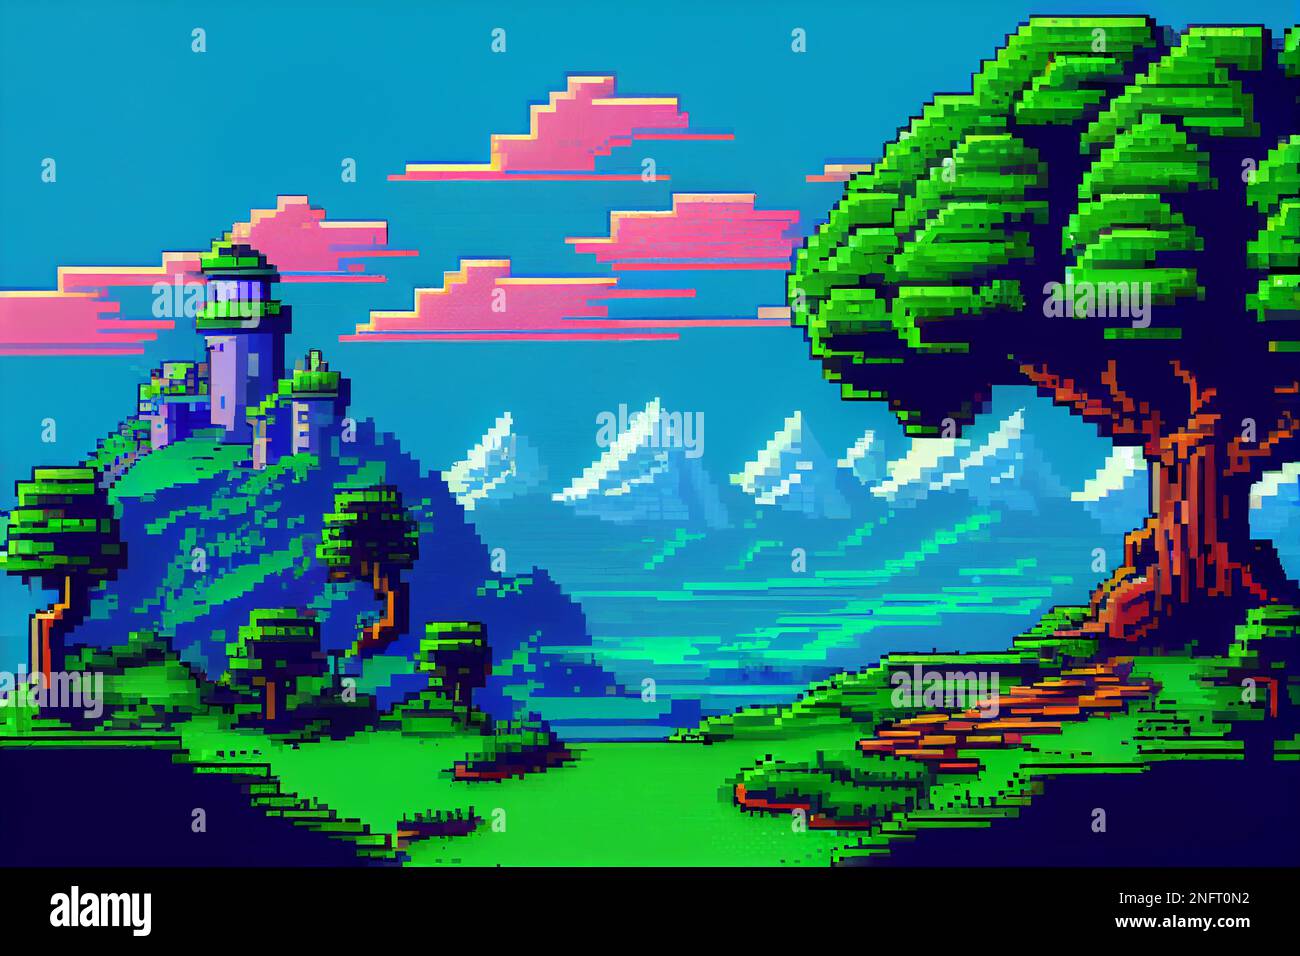 Video game background landscape with mountains and forests in 16 bit pixels. Retro video arcade game nature location with pixel art mountain hills, sn Stock Photo